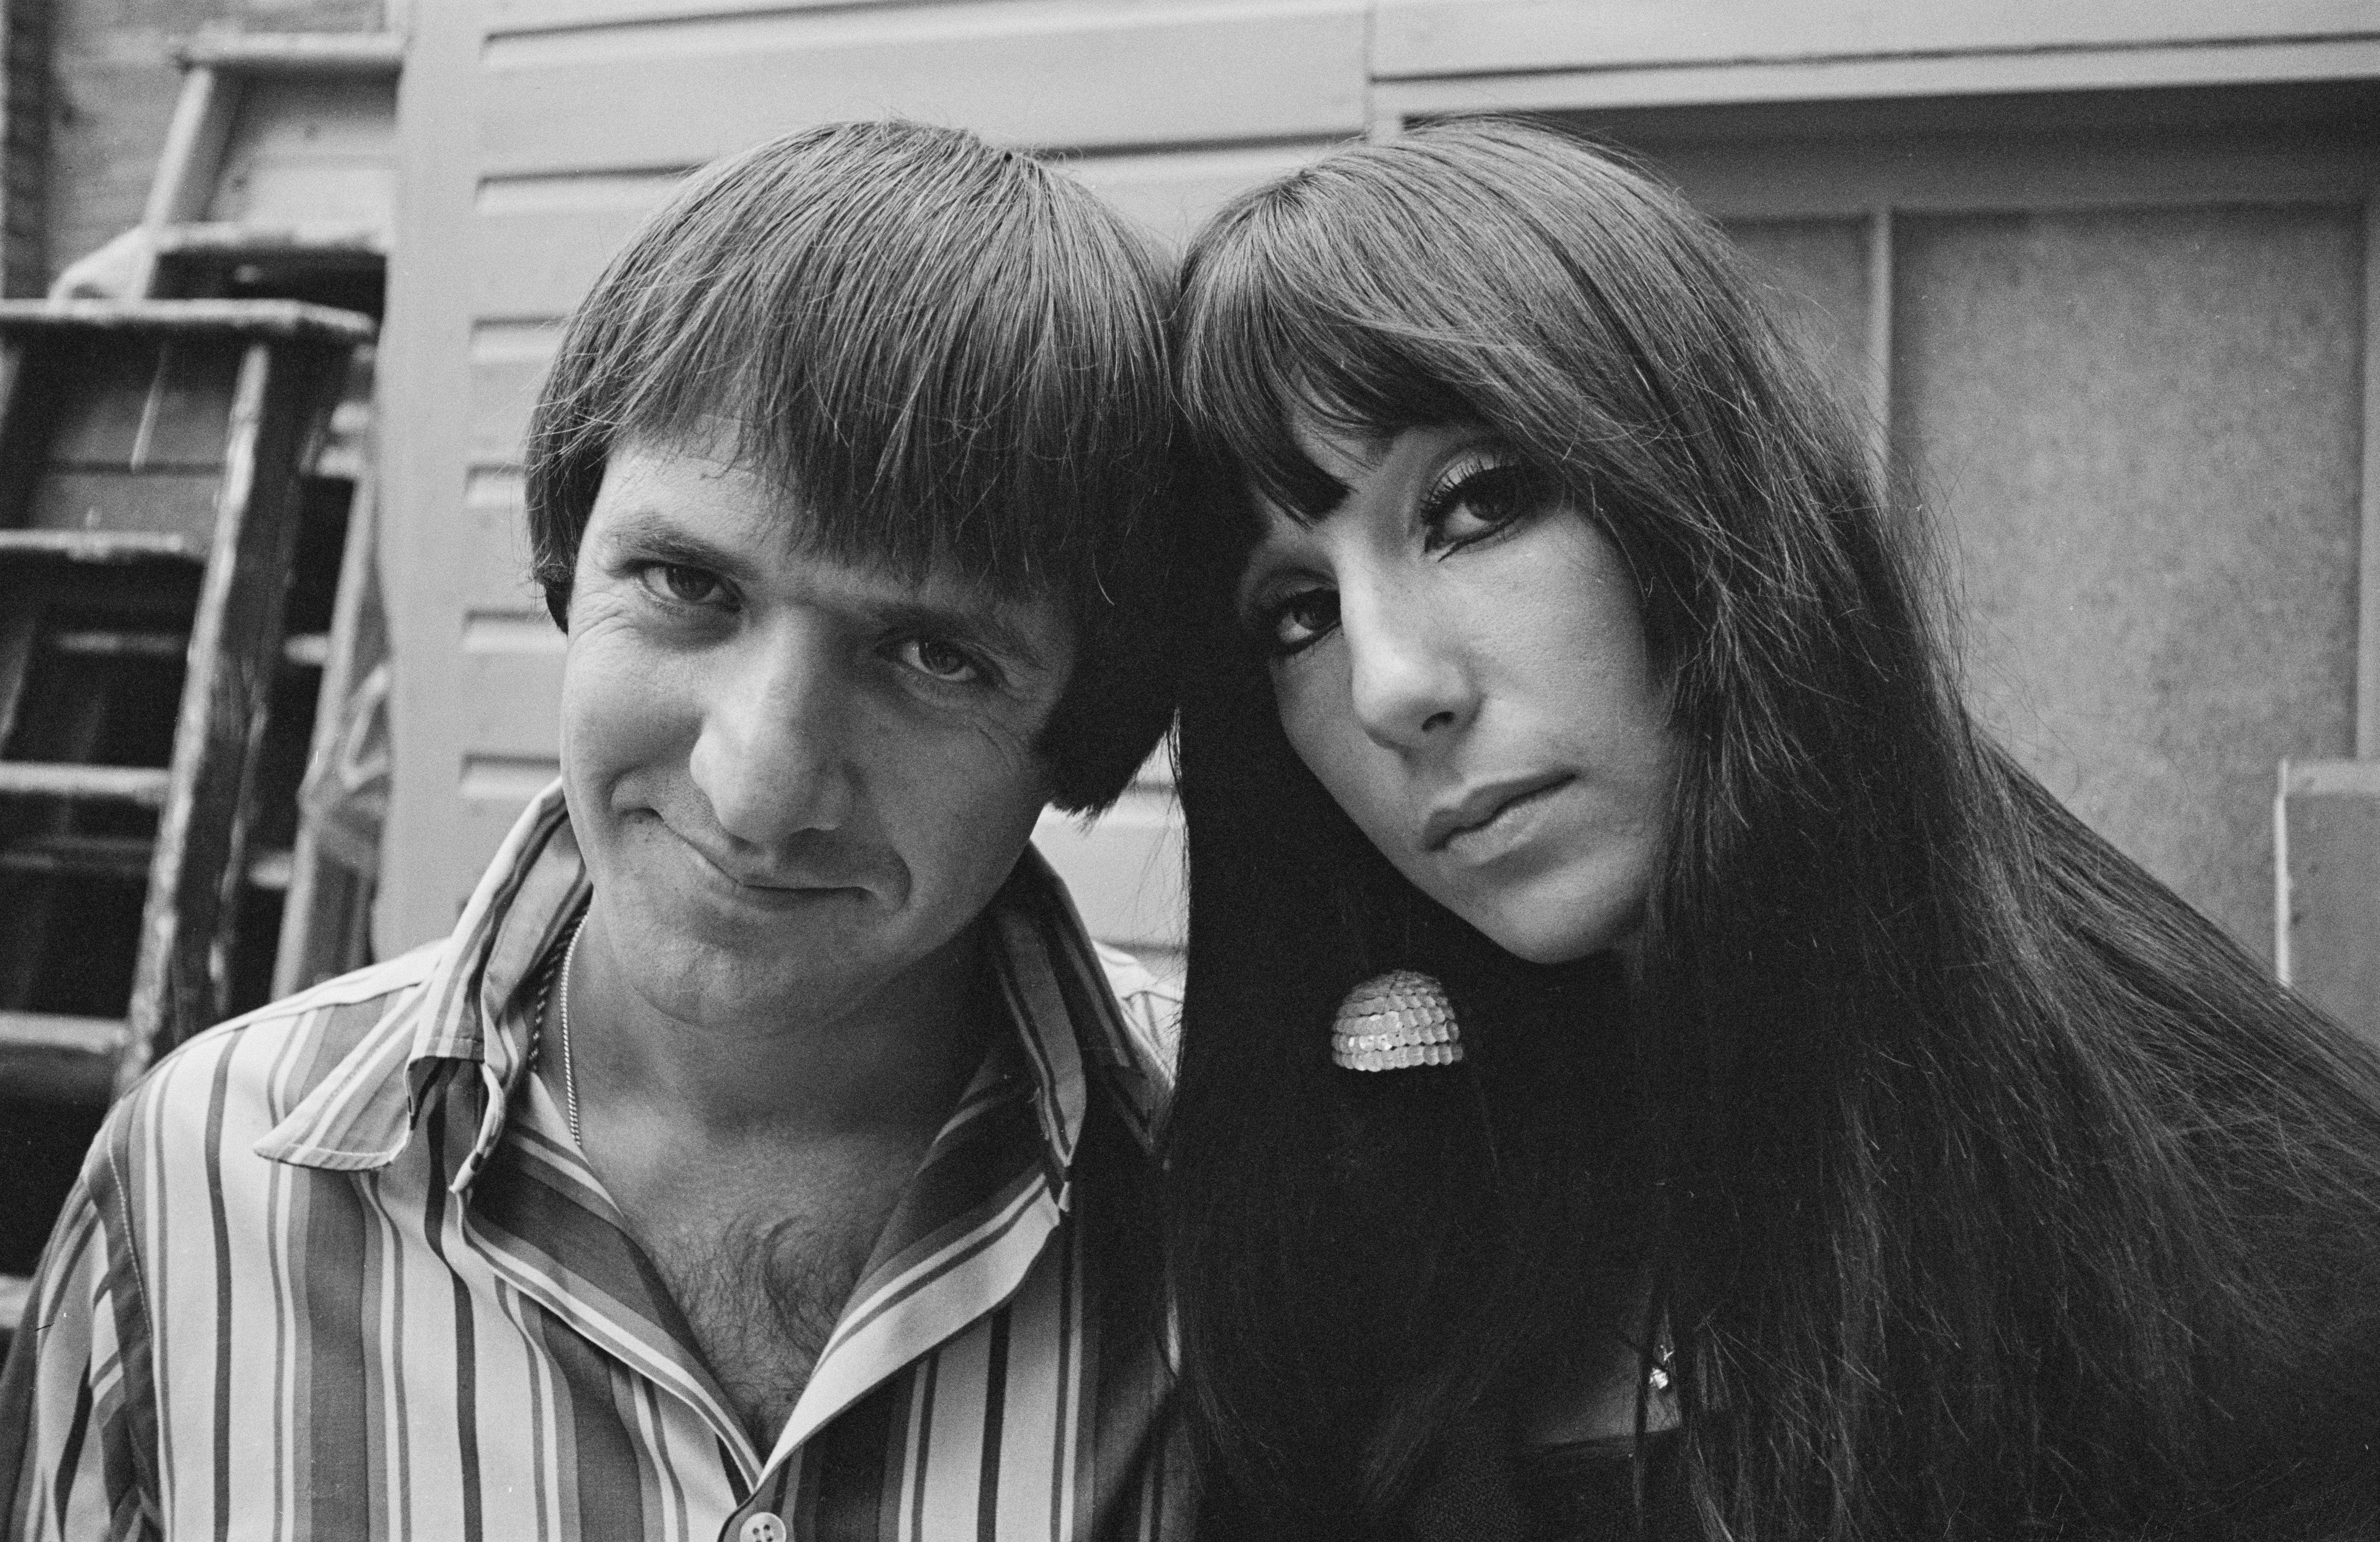 Sonny Bono and Cher in London on August 26, 1966 | Source: Getty Images